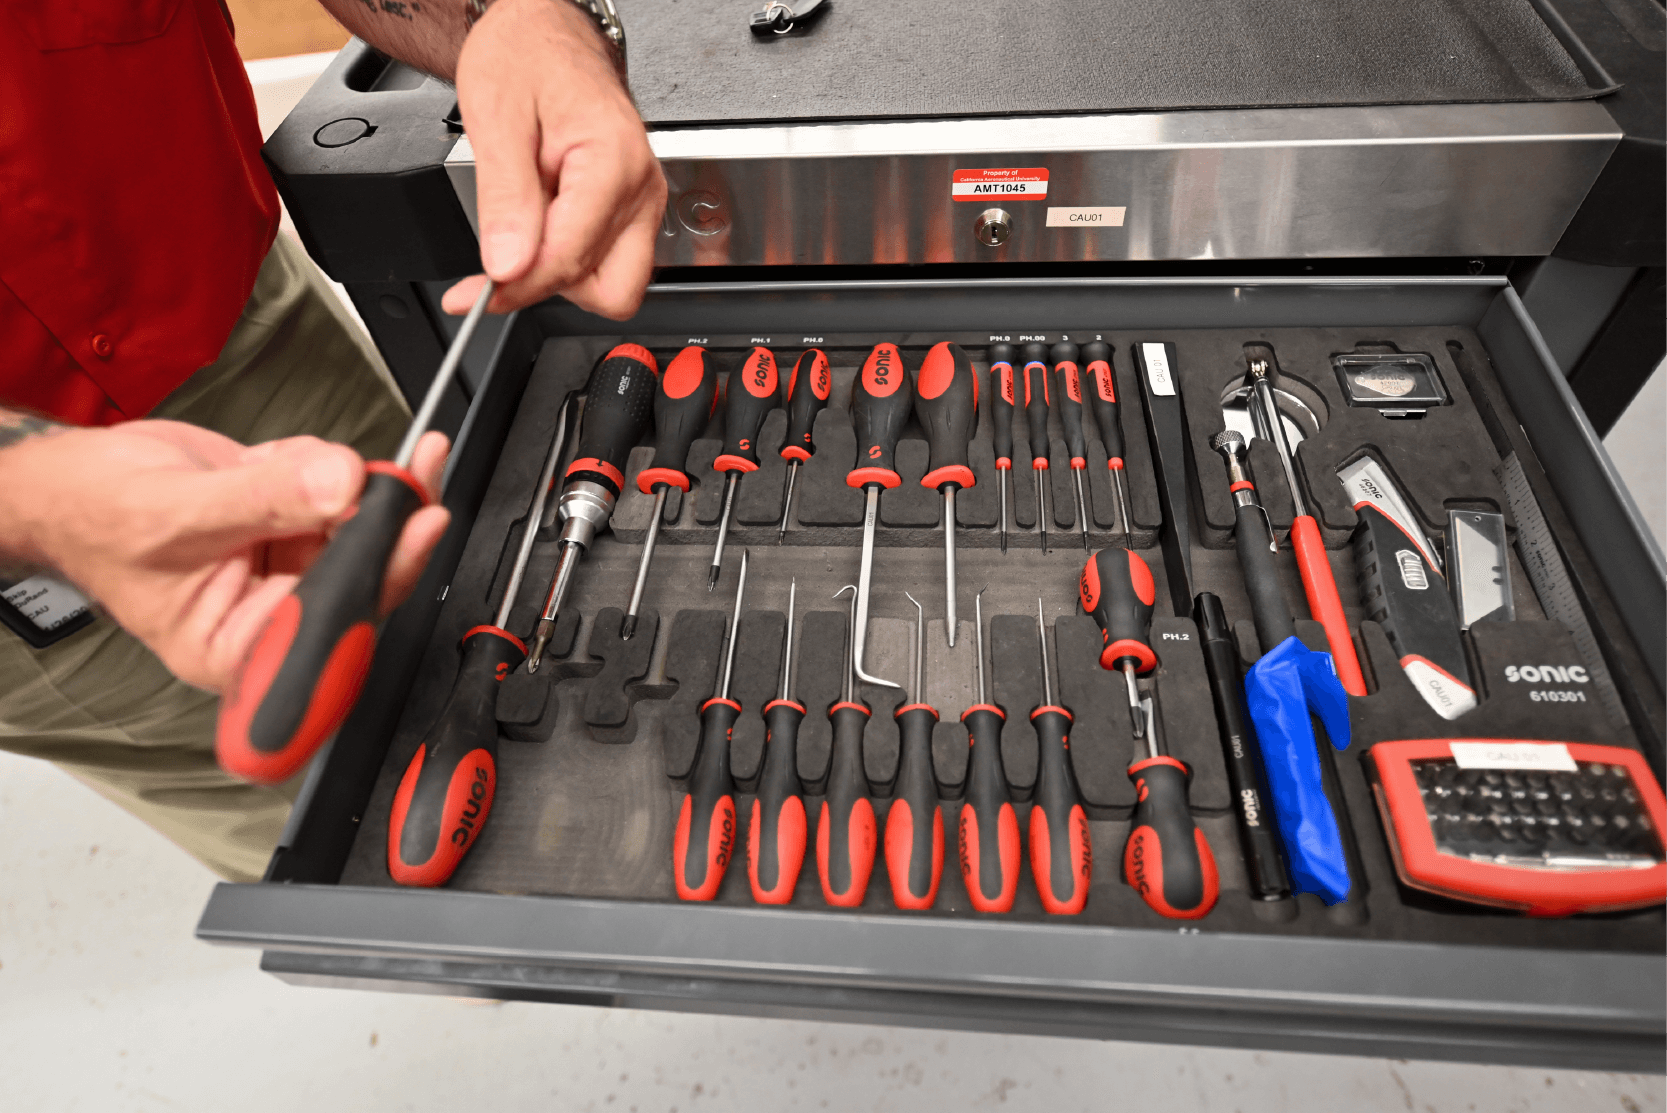 sonic tools for aircraft maintenance students to use in class